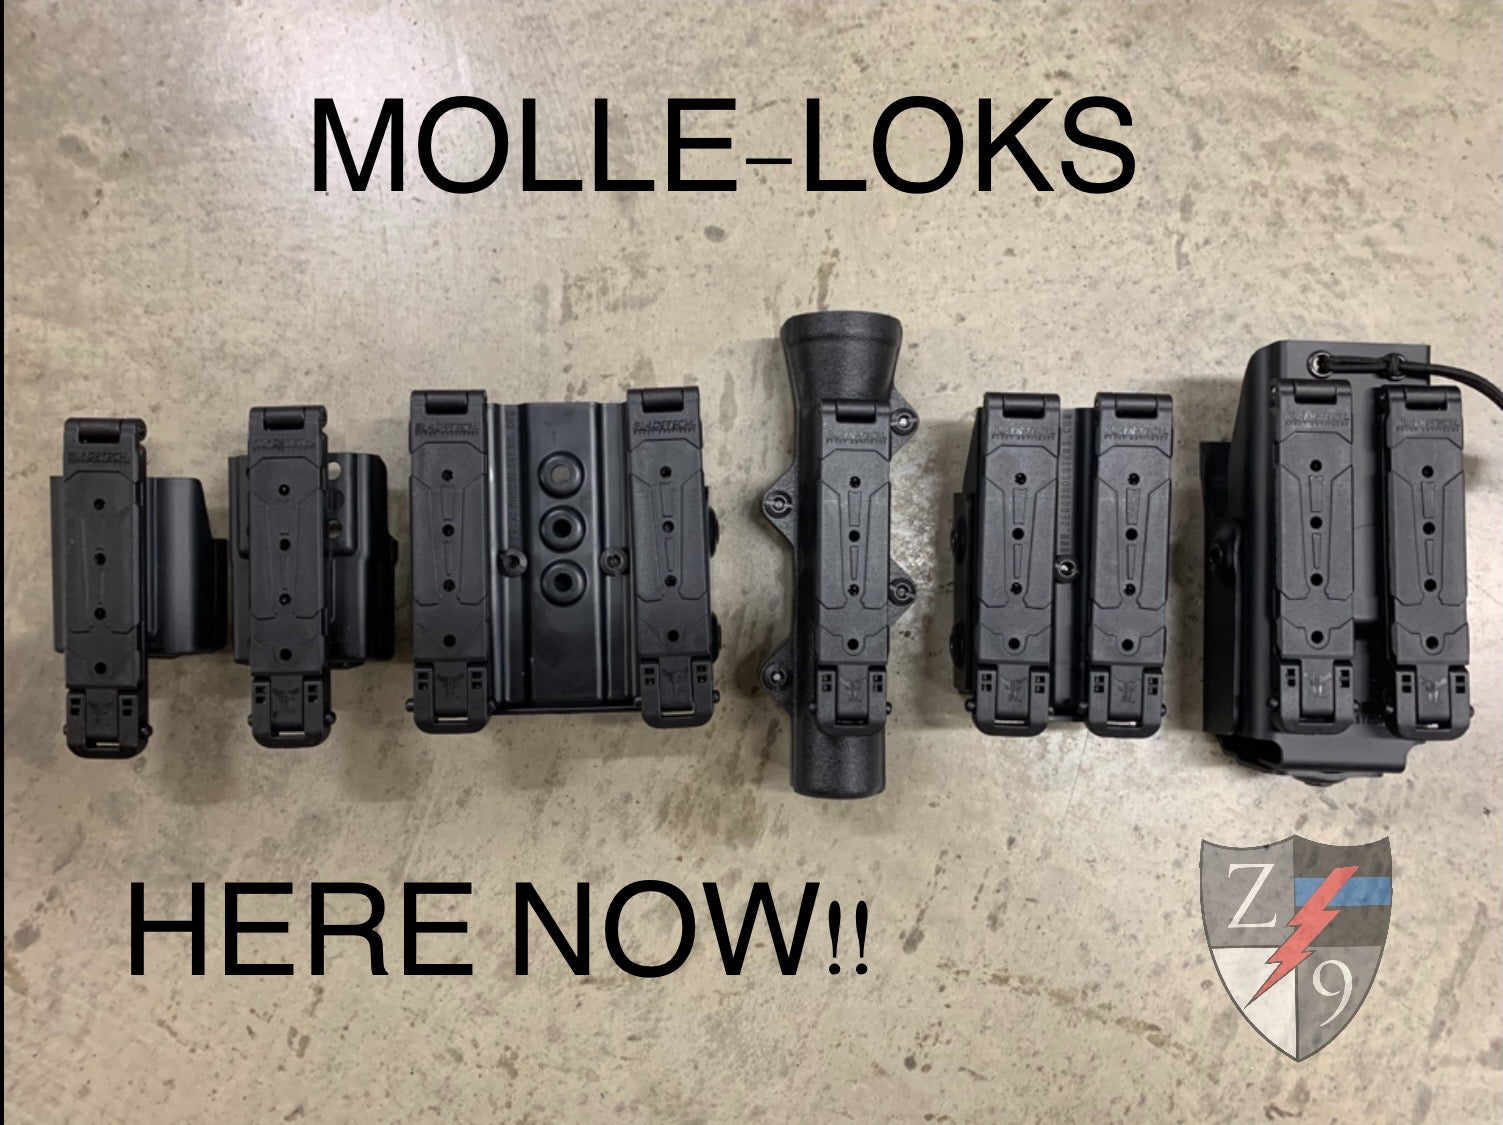 MOLLE-LOKS ARE LIVE!